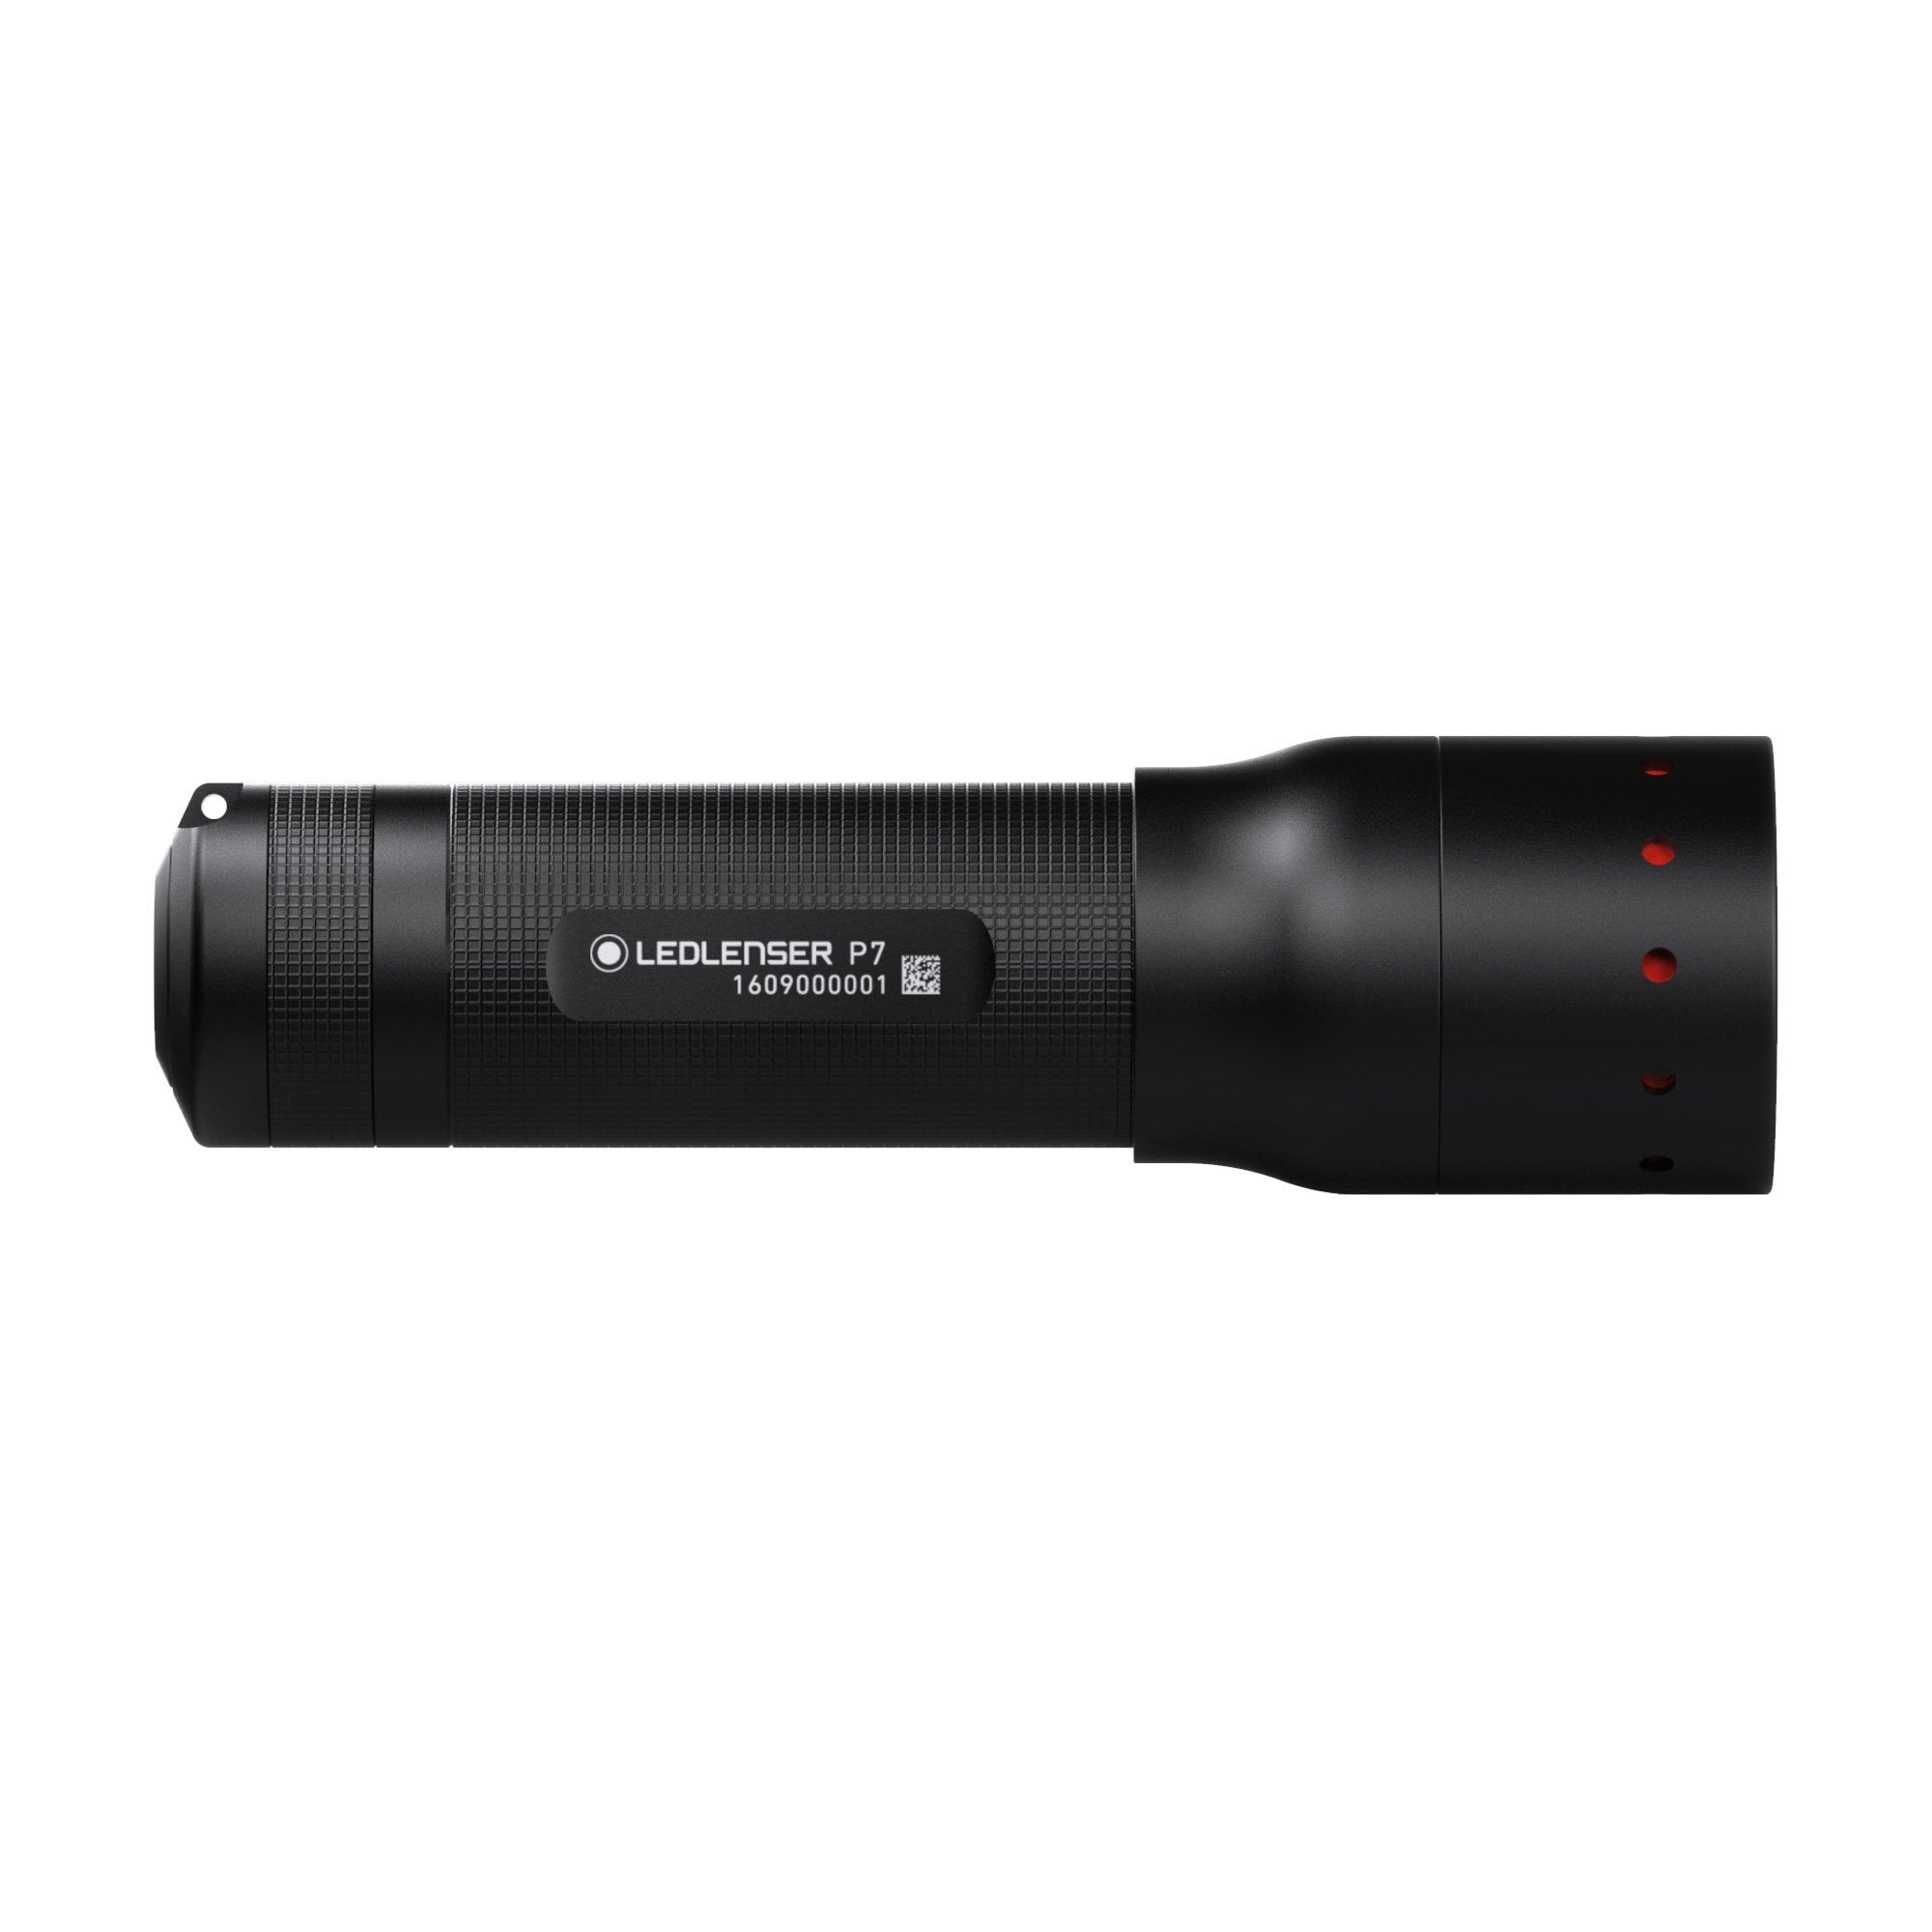 Discontinued - P7 Battery Operated Torch